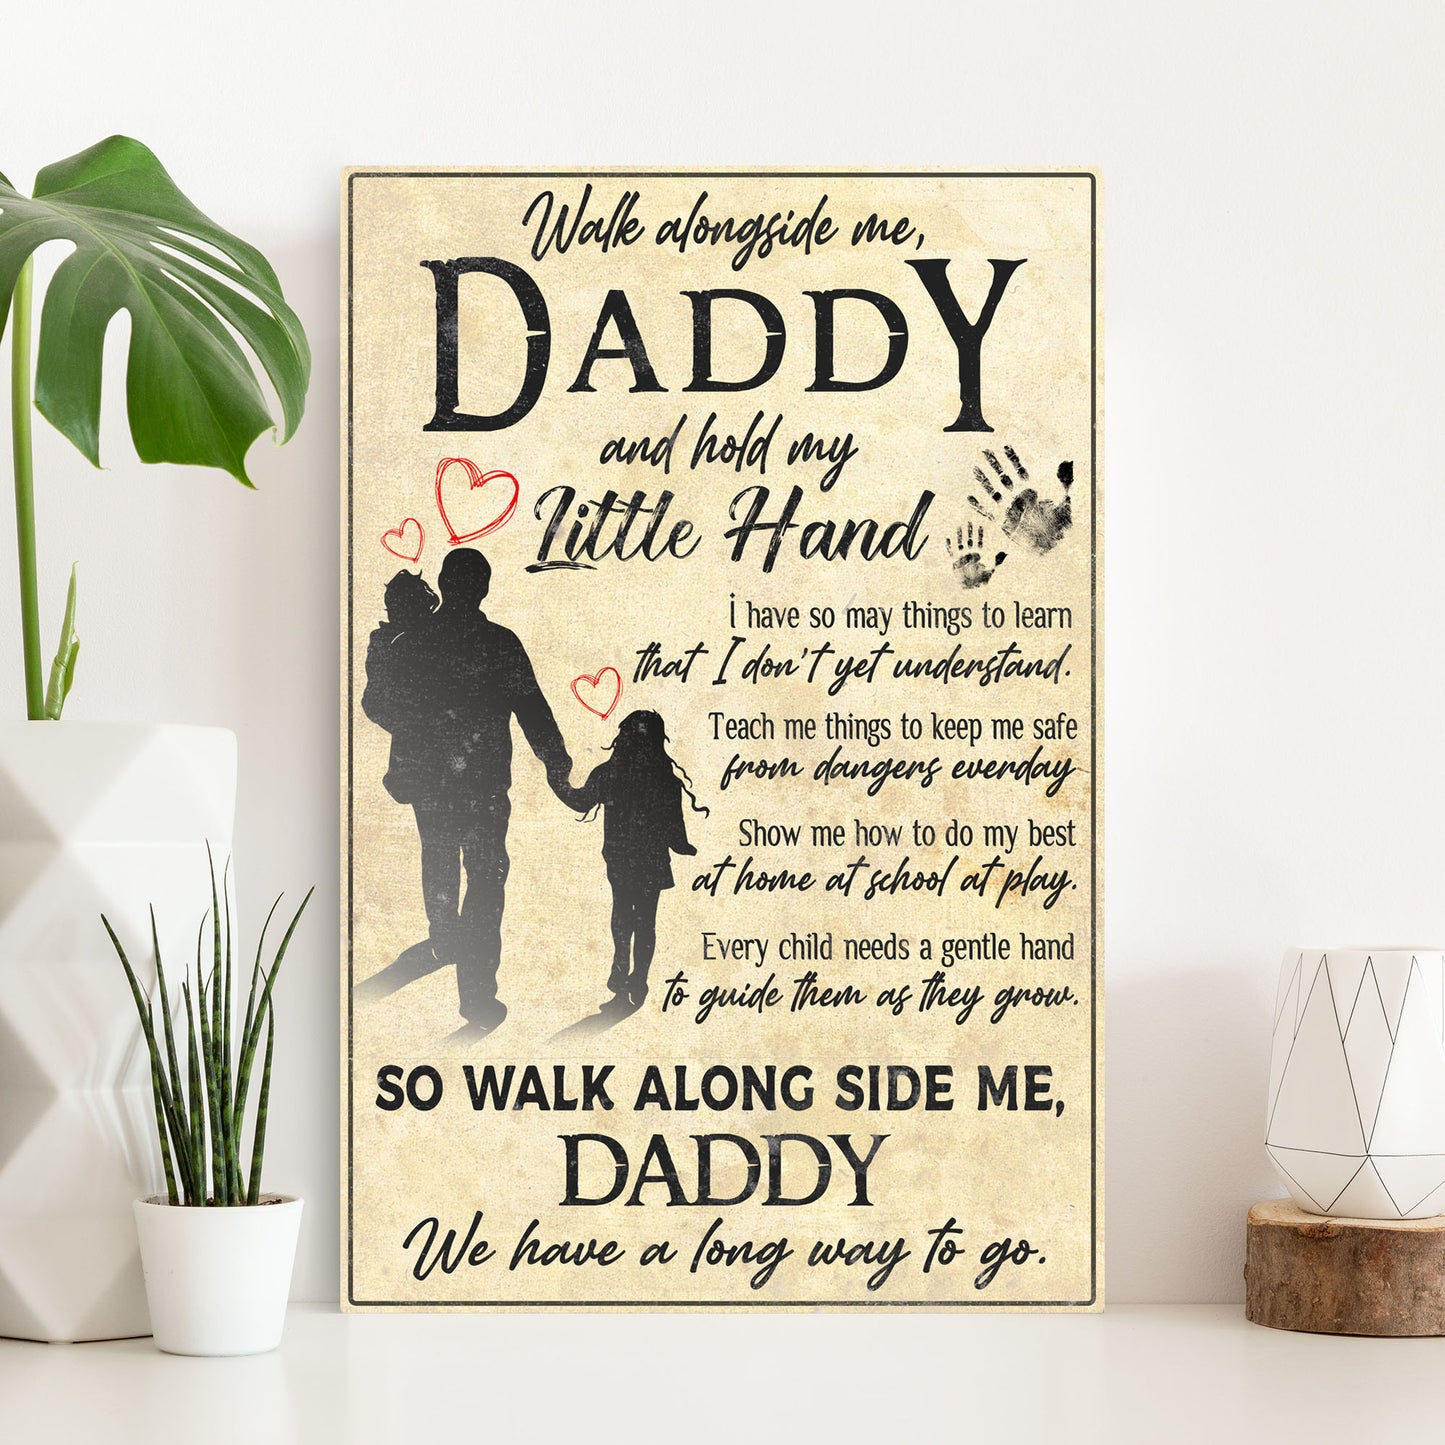 Walk Alongside Me Daddy, And Hold My Little Hand Sign  - Image by Tailored Canvases